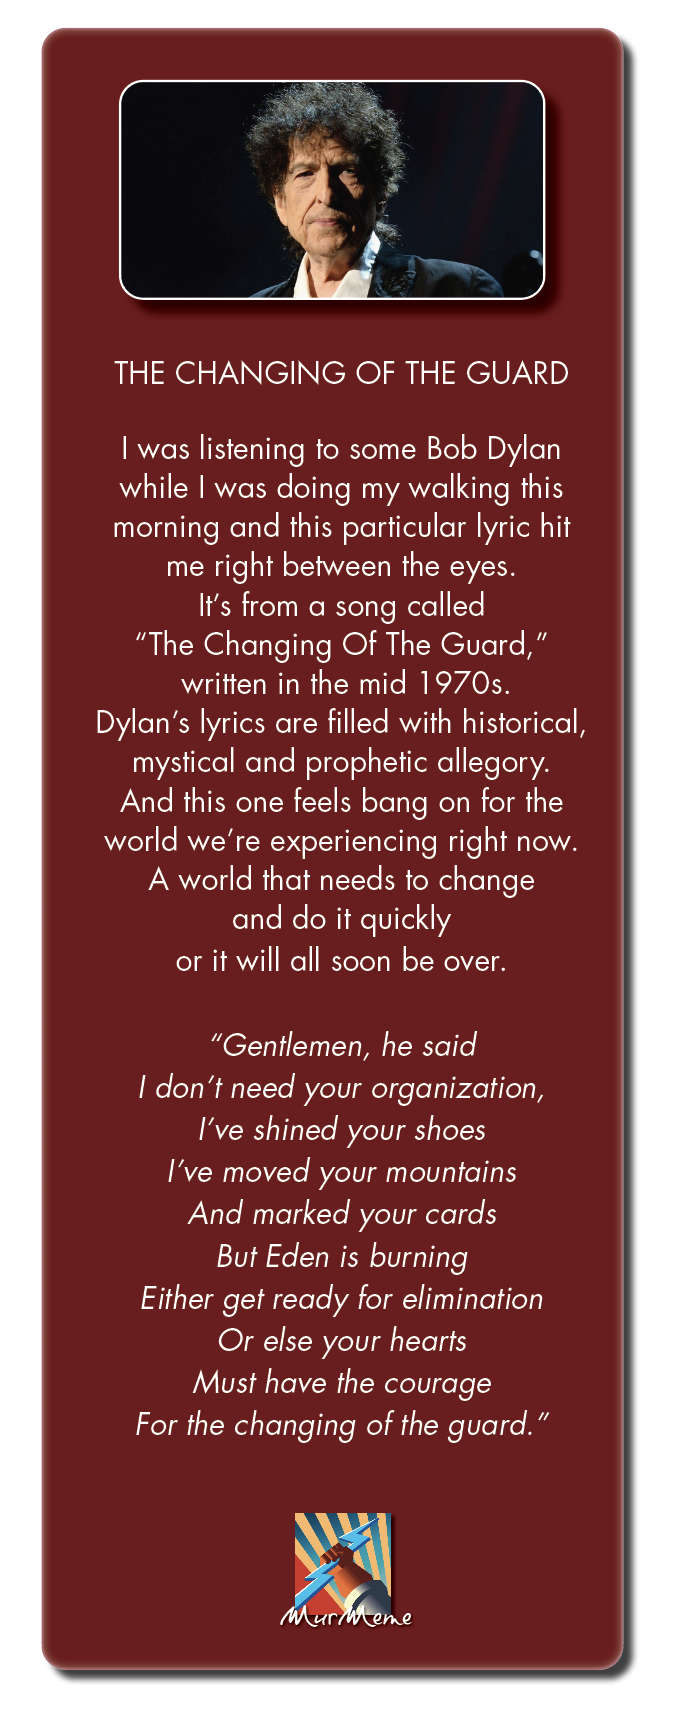 THE CHANGING OF THE GUARD

I was listening to some Bob Dylan
while | was doing my walking this
morning and this particular lyric hit
me right between the eyes.
It's from a song called
“The Changing Of The Guard,”
NGLEURTR LENT REVAL)
Dylan's lyrics are filled with historical,
mystical and prophetic allegory.
And this one feels bang on for the
world we're experiencing right now.
A world that needs to change
and do it quickly
or it will all soon be over.

“Gentlemen, he said

| don’t need your organization,

I've shined your shoes
I've moved your mountains
And marked your cards
But Eden is burning
Either get ready for elimination
Or else your hearts
Must have the courage
For the changing of the guard.”

Xx